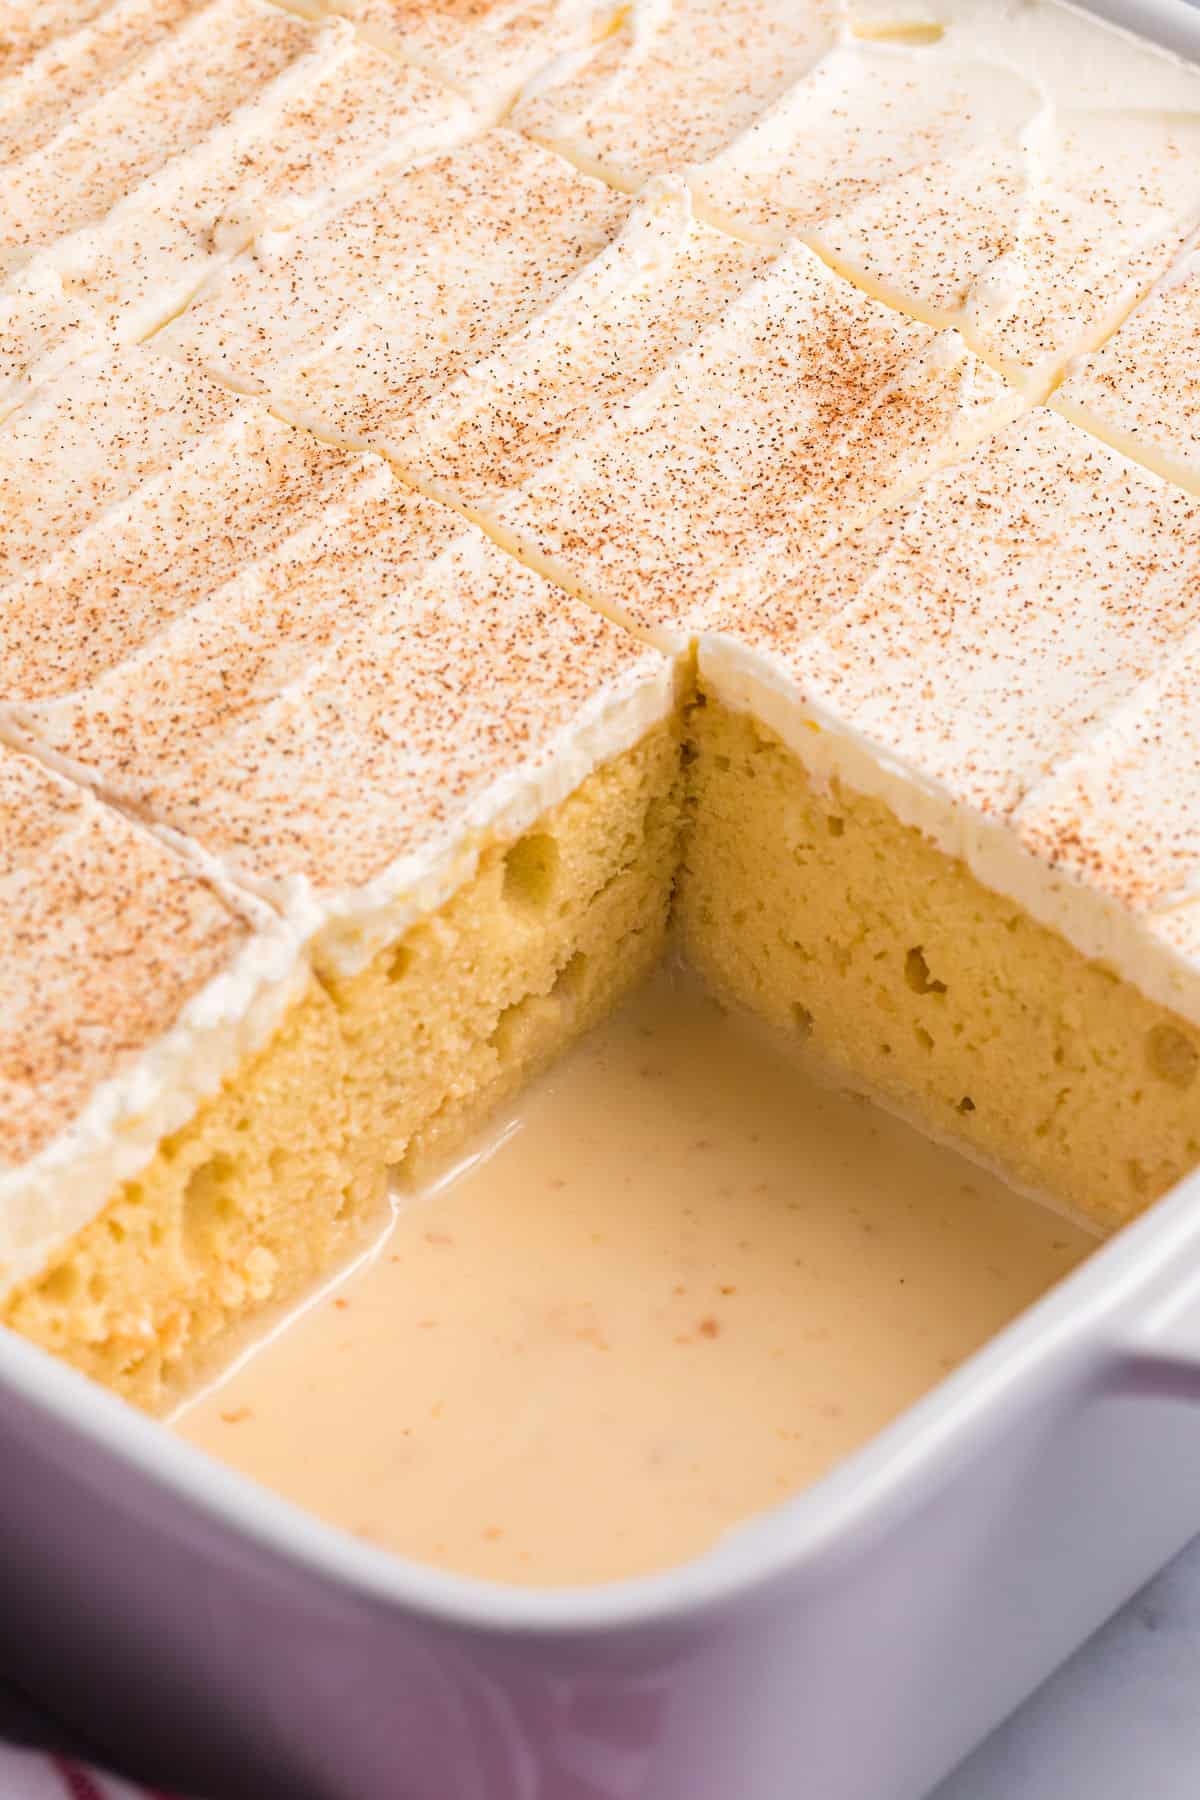 A slice of tres leches cake is missing from the baking dish.